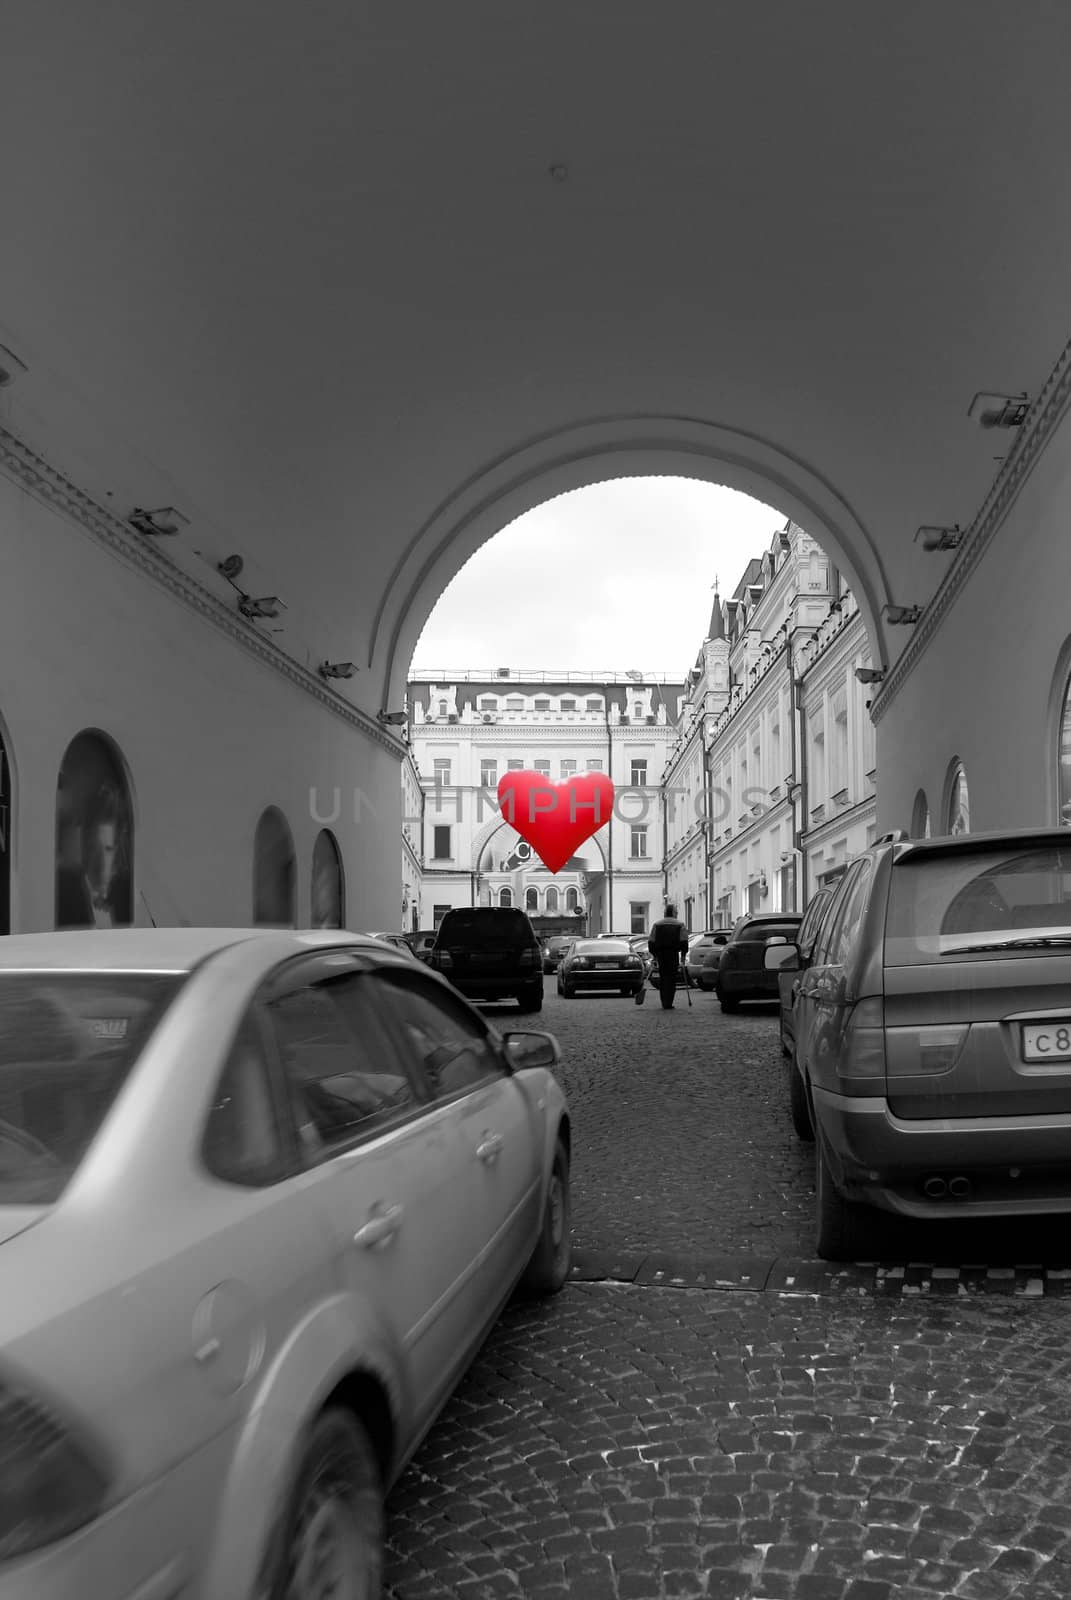 Big red heart ballon is hanging over old stree